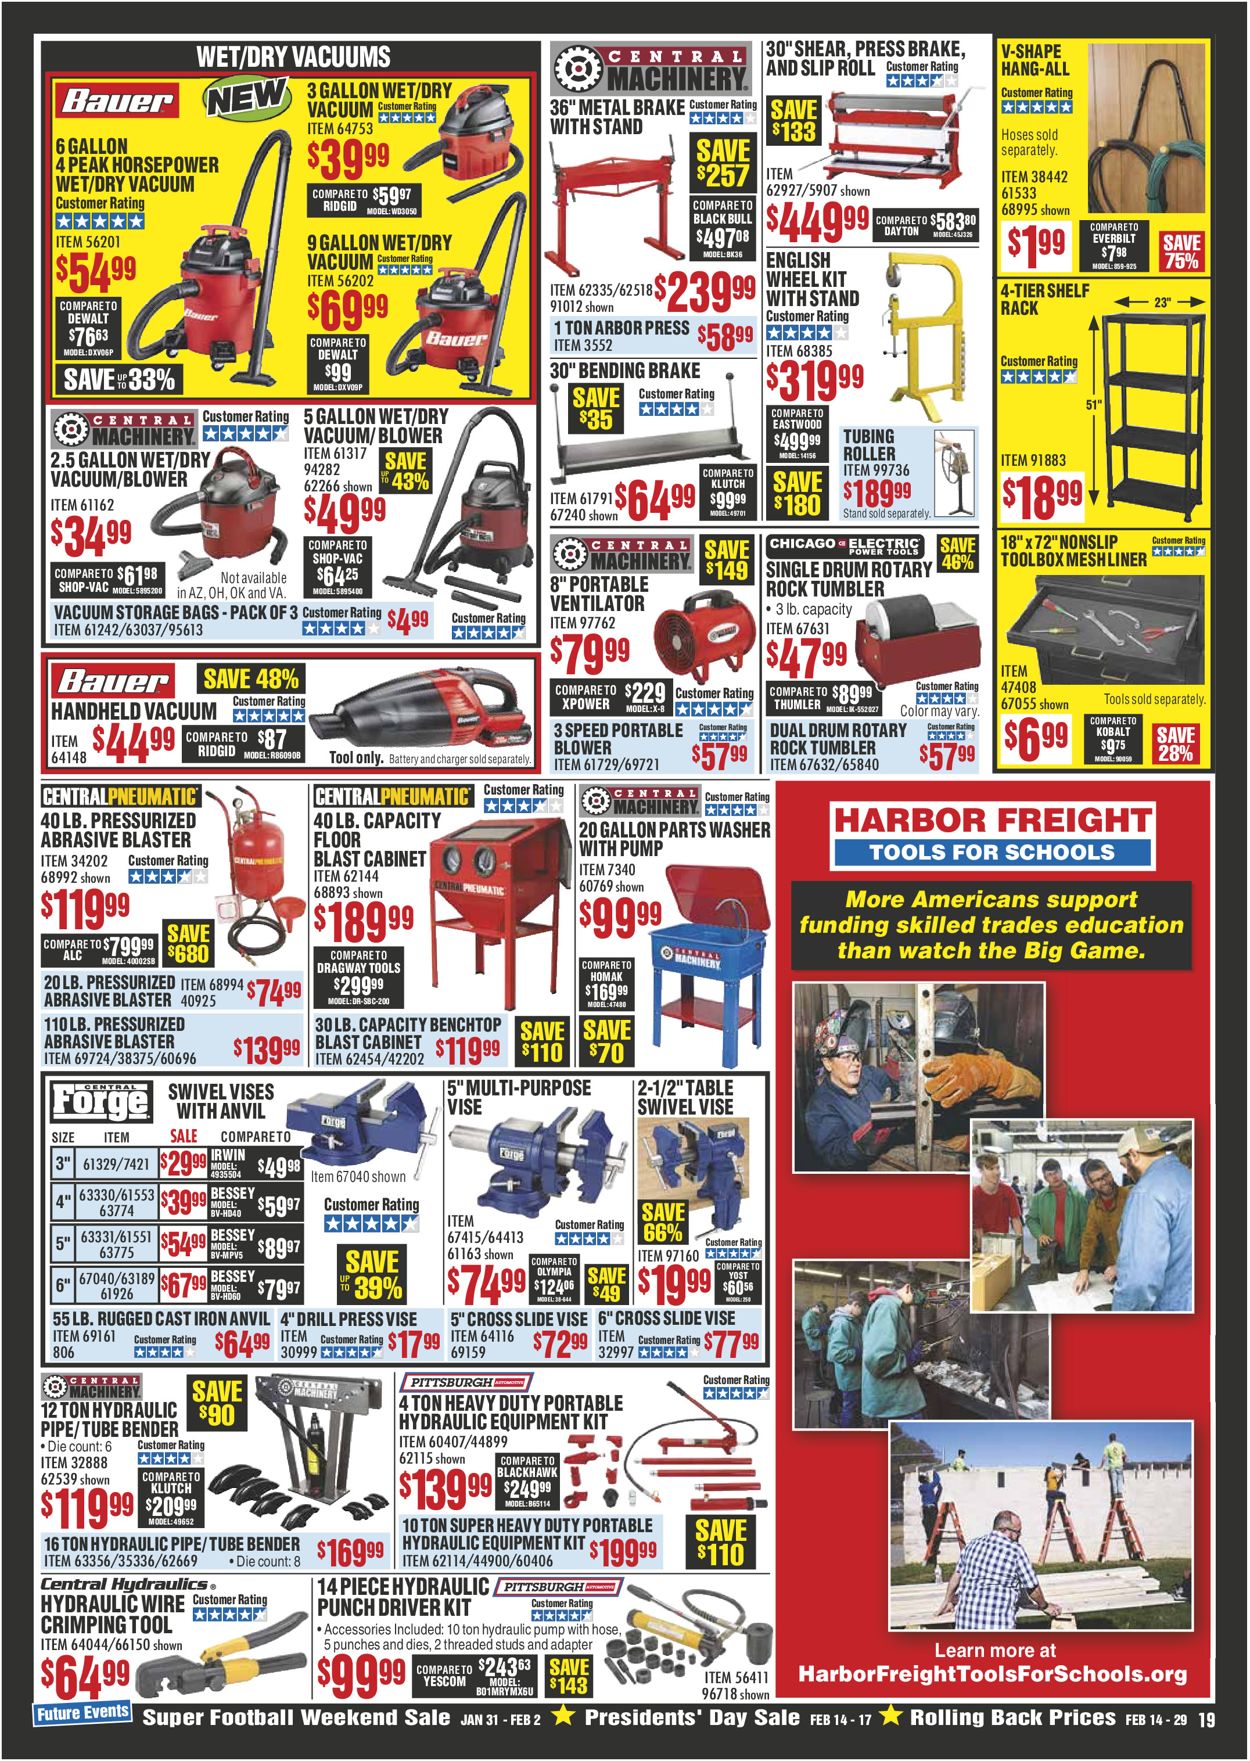 Harbor Freight Current weekly ad 02/01 02/29/2020 [19]